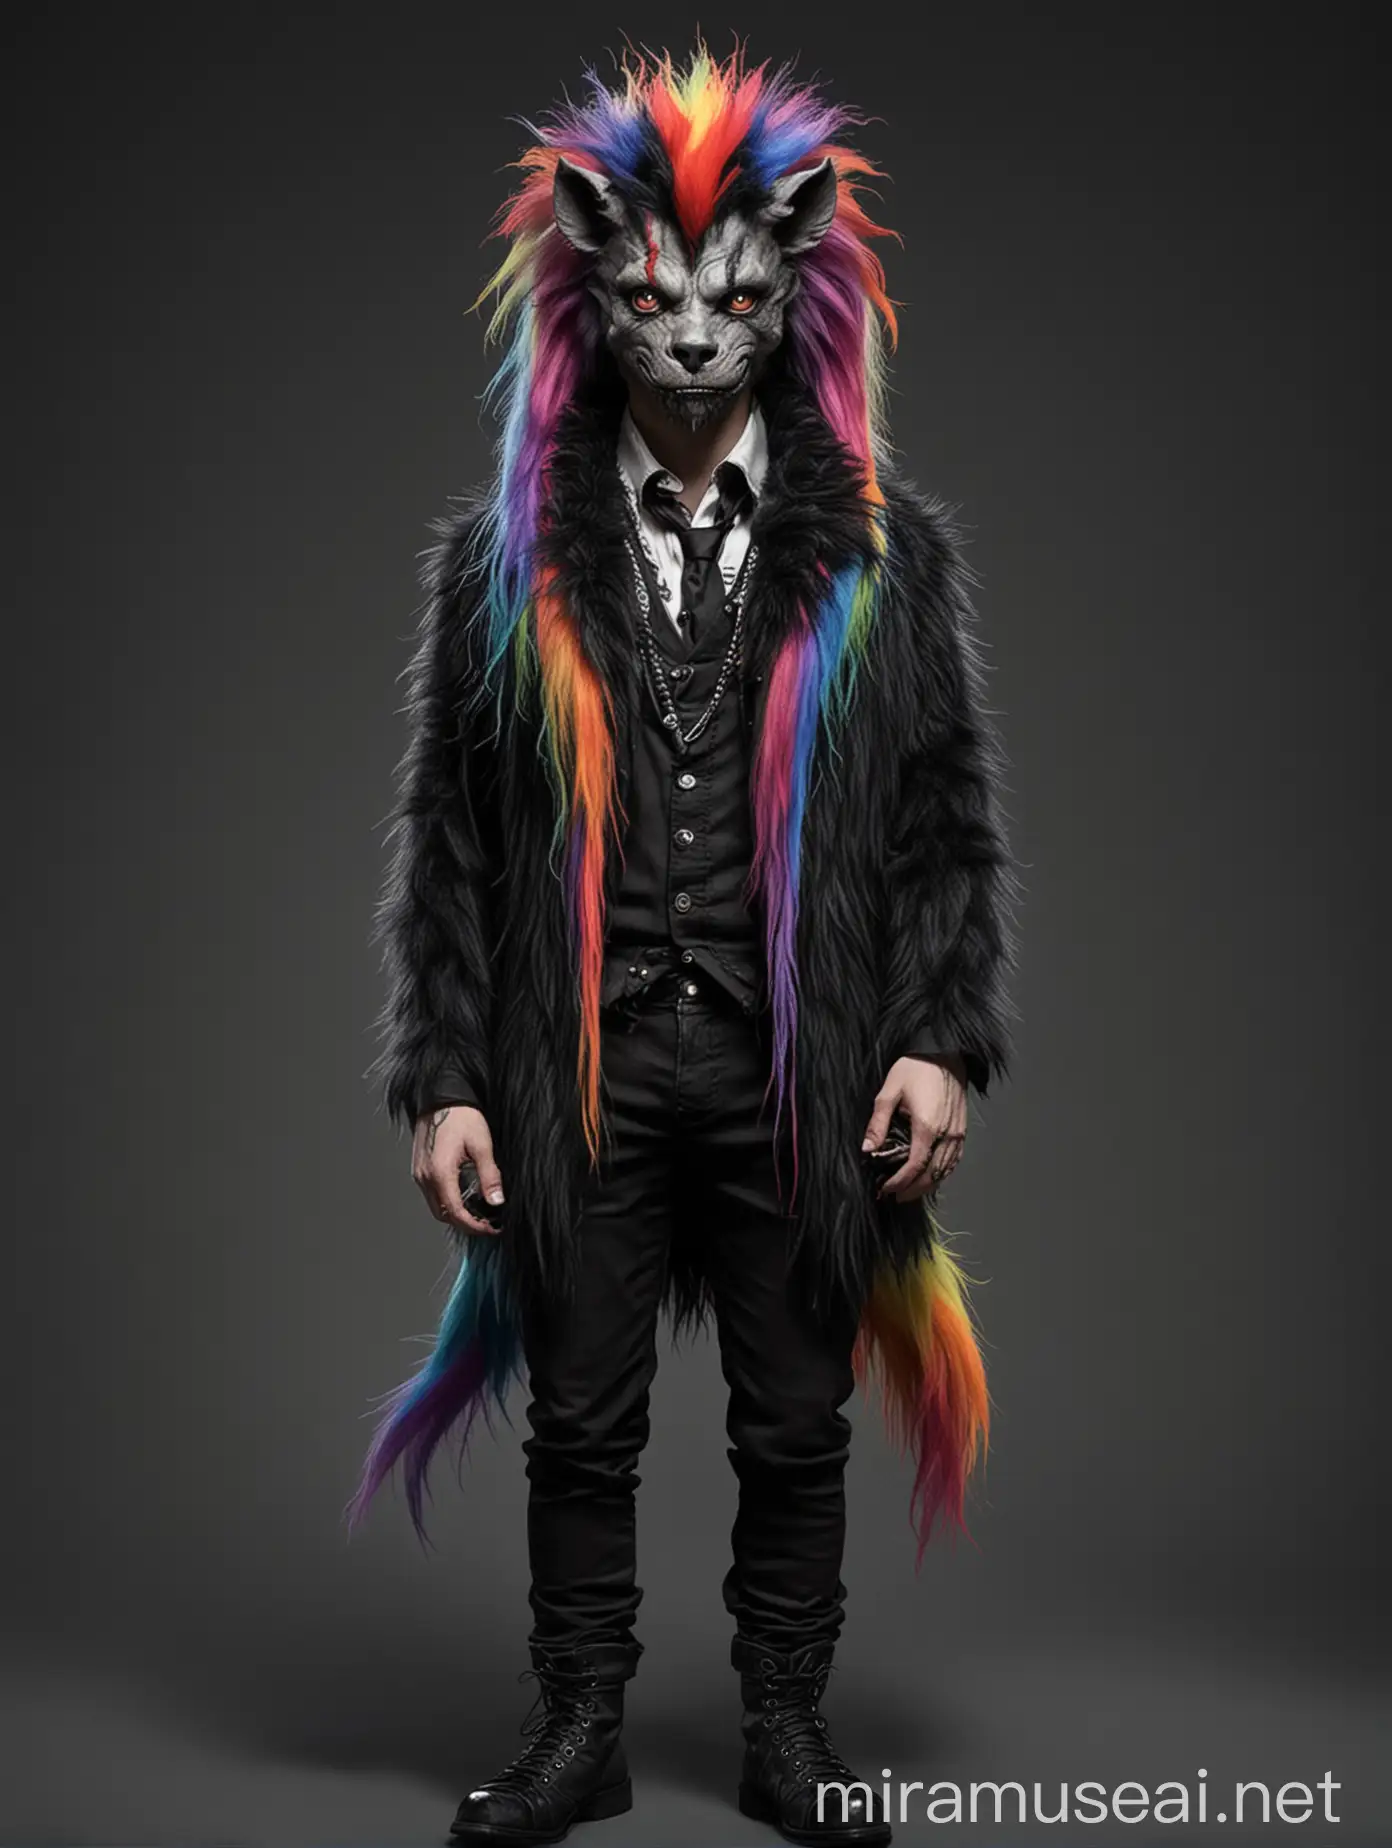 Turn this guy into a cute furr monster in gothic style, full body in dark colours but with rainbow furr, with a pony tail hair